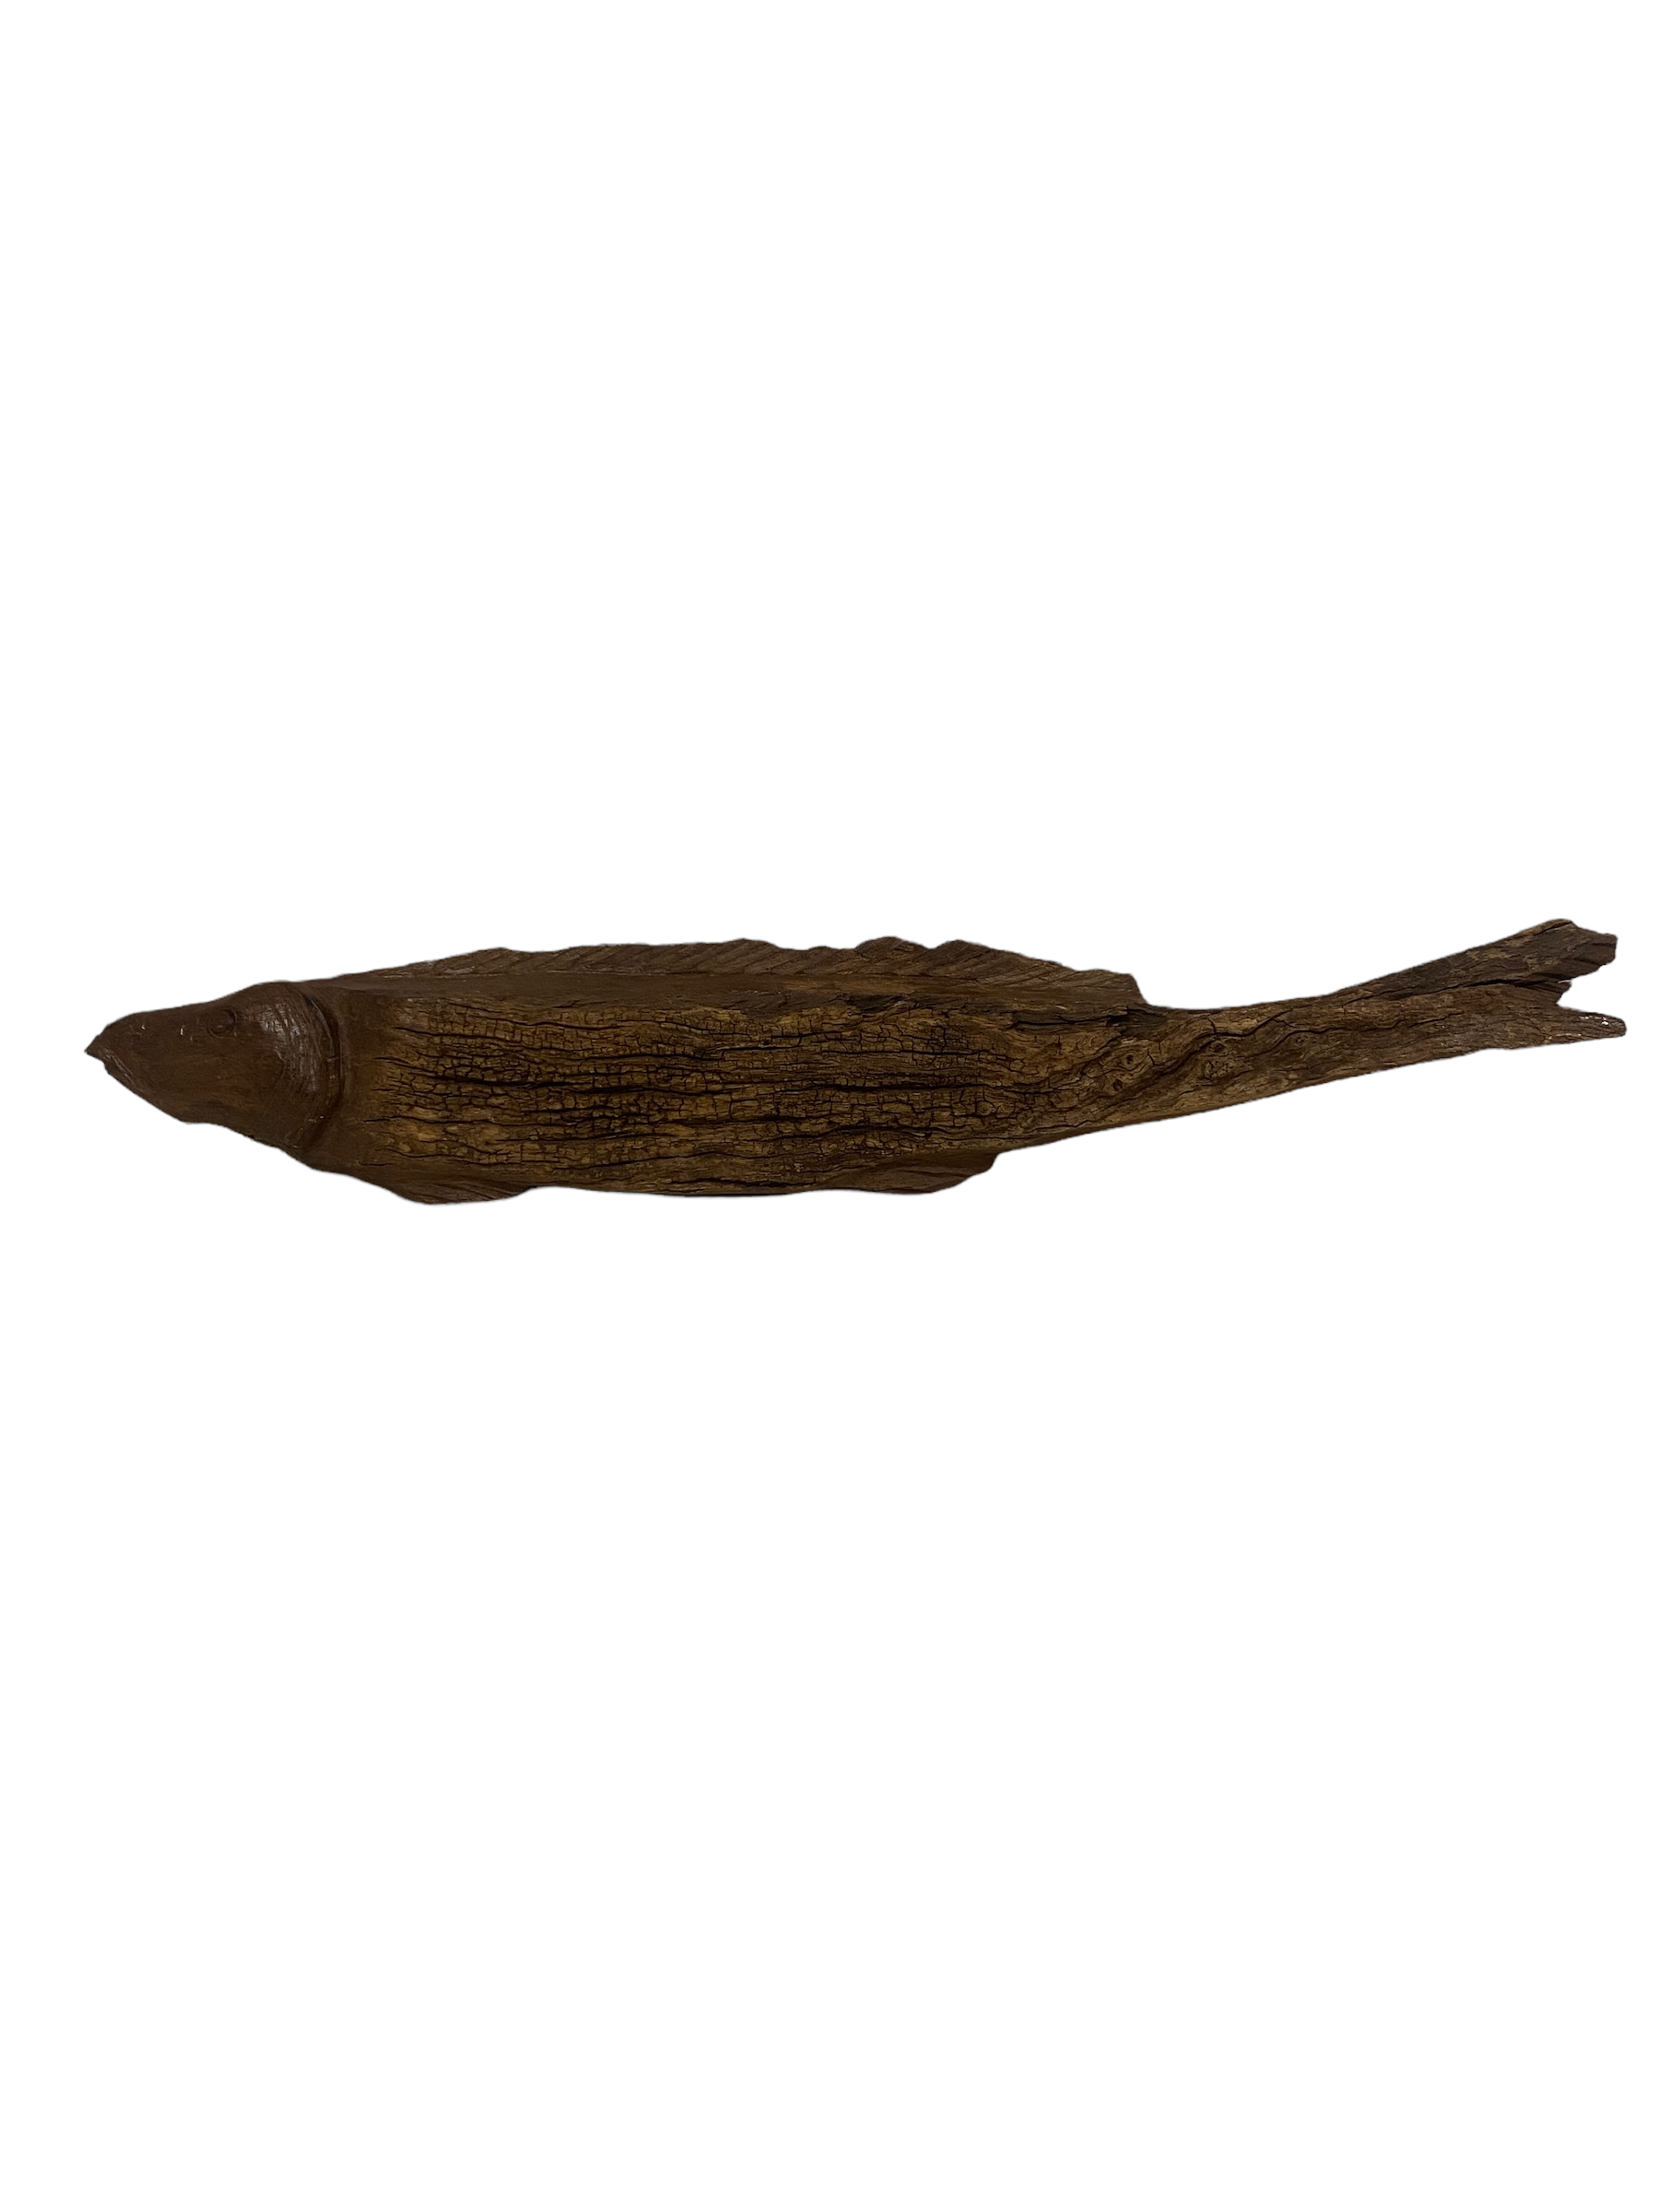 Driftwood Hand Carved Fish - (11.1) Sml